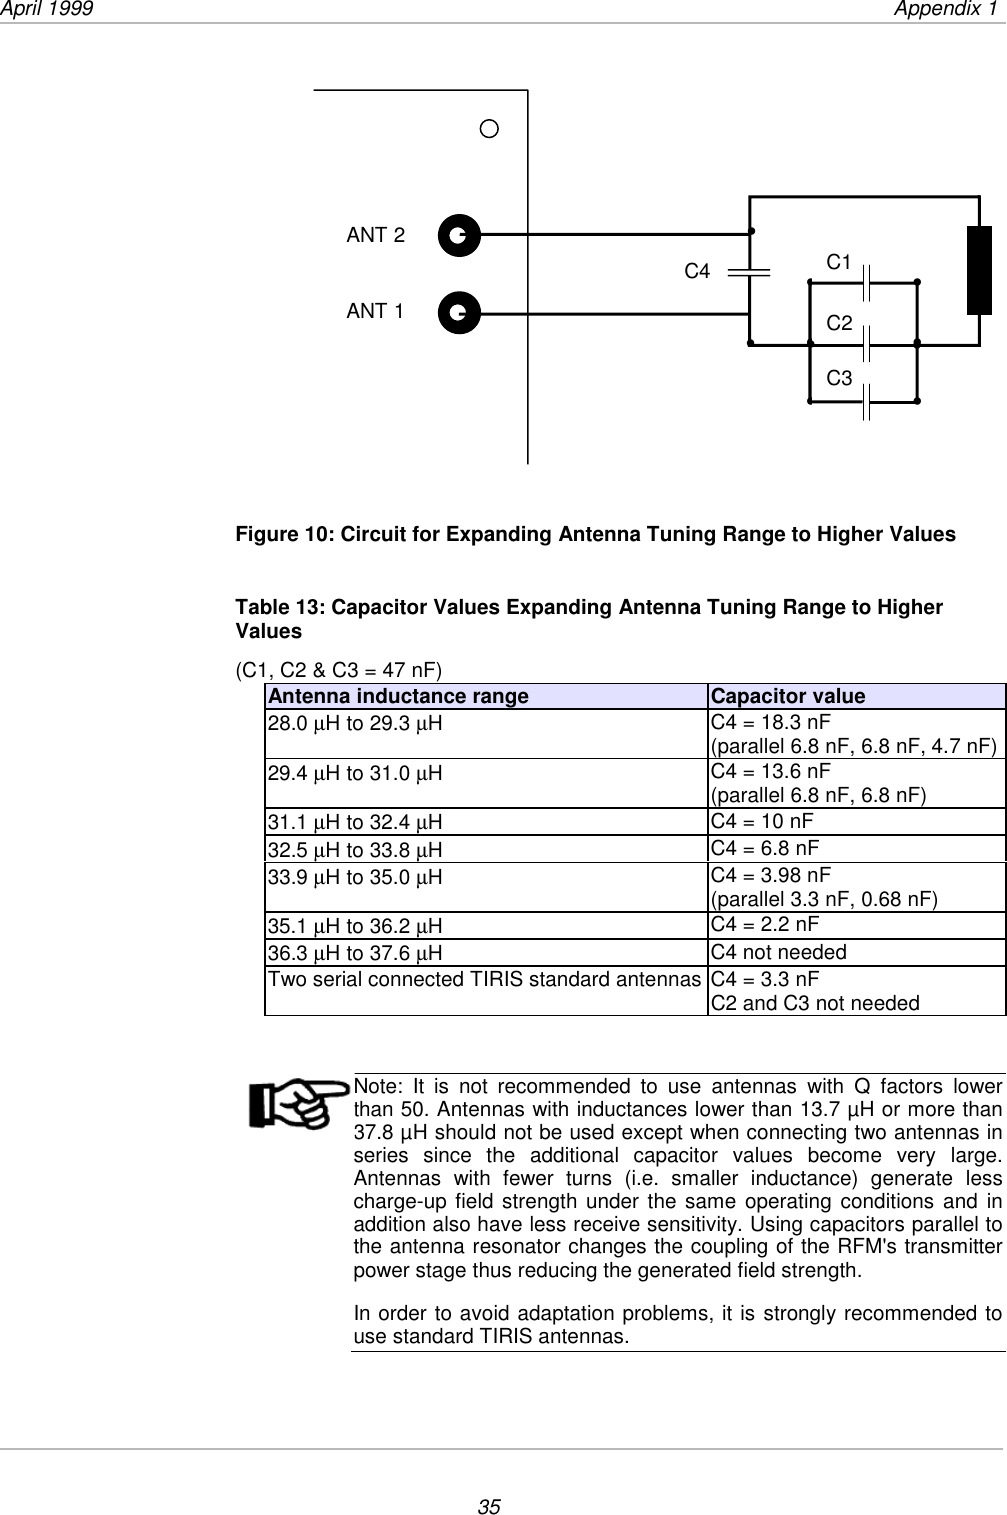 April 1999             Appendix 135Figure 10: Circuit for Expanding Antenna Tuning Range to Higher ValuesTable 13: Capacitor Values Expanding Antenna Tuning Range to HigherValues(C1, C2 &amp; C3 = 47 nF)Antenna inductance range Capacitor value28.0 µH to 29.3 µHC4 = 18.3 nF(parallel 6.8 nF, 6.8 nF, 4.7 nF)29.4 µH to 31.0 µHC4 = 13.6 nF(parallel 6.8 nF, 6.8 nF)31.1 µH to 32.4 µHC4 = 10 nF32.5 µH to 33.8 µHC4 = 6.8 nF33.9 µH to 35.0 µHC4 = 3.98 nF(parallel 3.3 nF, 0.68 nF)35.1 µH to 36.2 µHC4 = 2.2 nF36.3 µH to 37.6 µHC4 not neededTwo serial connected TIRIS standard antennas C4 = 3.3 nFC2 and C3 not neededNote: It is not recommended to use antennas with Q factors lowerthan 50. Antennas with inductances lower than 13.7 µH or more than37.8 µH should not be used except when connecting two antennas inseries since the additional capacitor values become very large.Antennas with fewer turns (i.e. smaller inductance) generate lesscharge-up field strength under the same operating conditions and inaddition also have less receive sensitivity. Using capacitors parallel tothe antenna resonator changes the coupling of the RFM&apos;s transmitterpower stage thus reducing the generated field strength.In order to avoid adaptation problems, it is strongly recommended touse standard TIRIS antennas.ANT 2ANT 1•••••••••C4 C1C2C3•